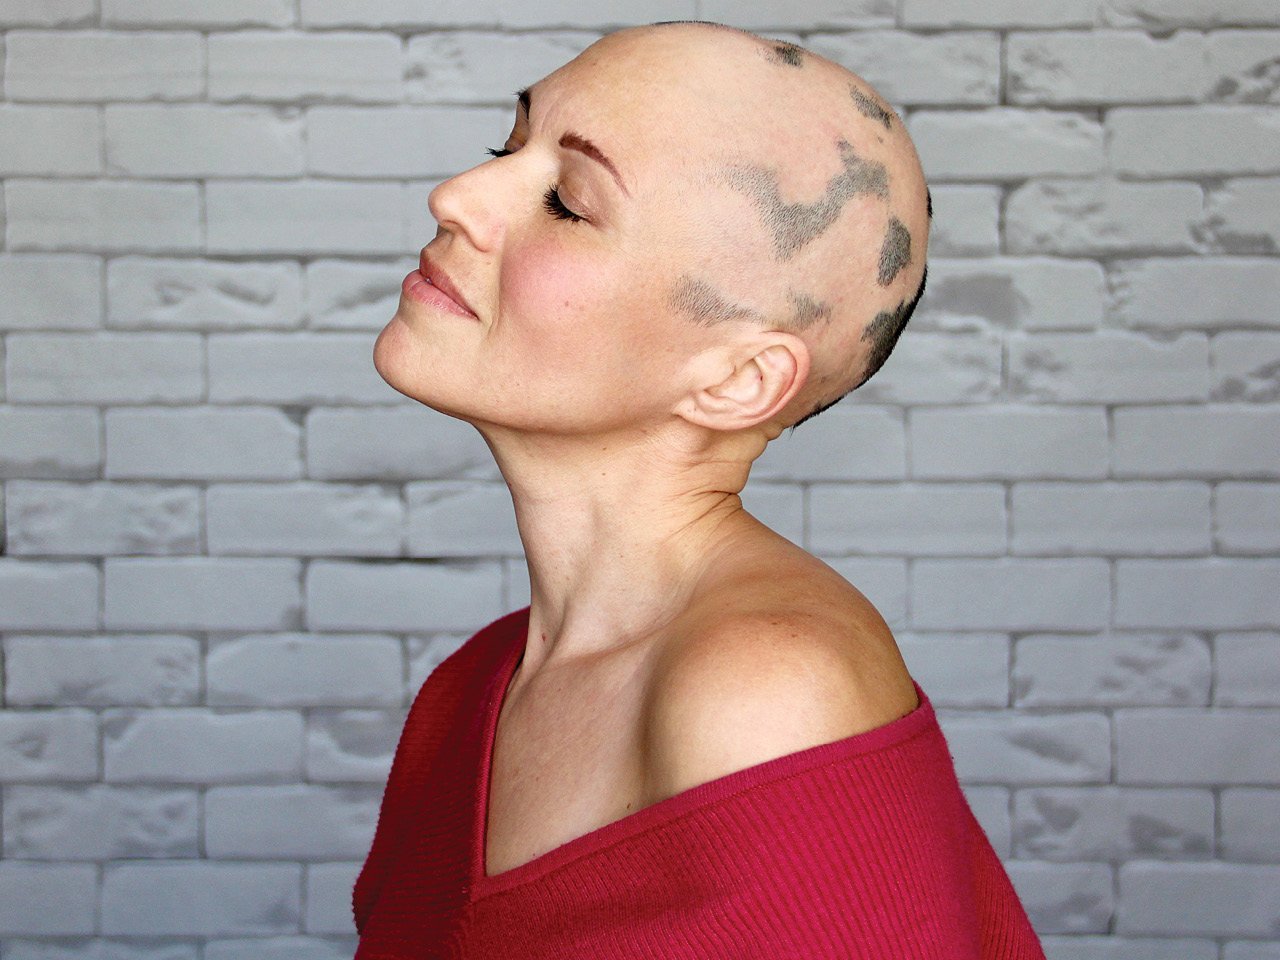 A photo of Anne-Lise Nadeau after she shaved her head following her experience with alopecia areata.